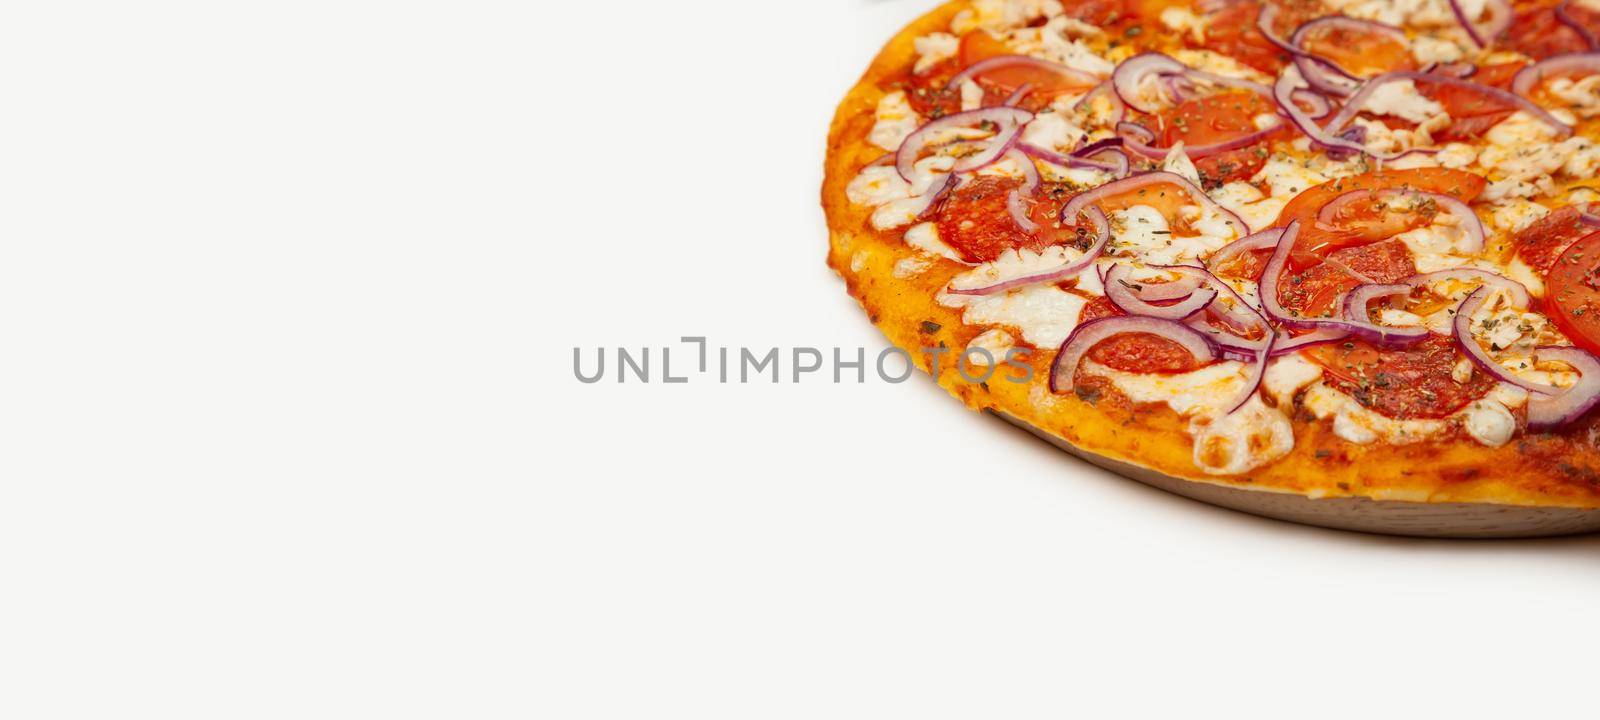 Delicious Rustic pizza. Signature sauce, mozzarella cheese, pepperoni, chicken fillet, tomatoes, red onion. Close-up. Advertising flyer and poster for restaurants. With copy space for text